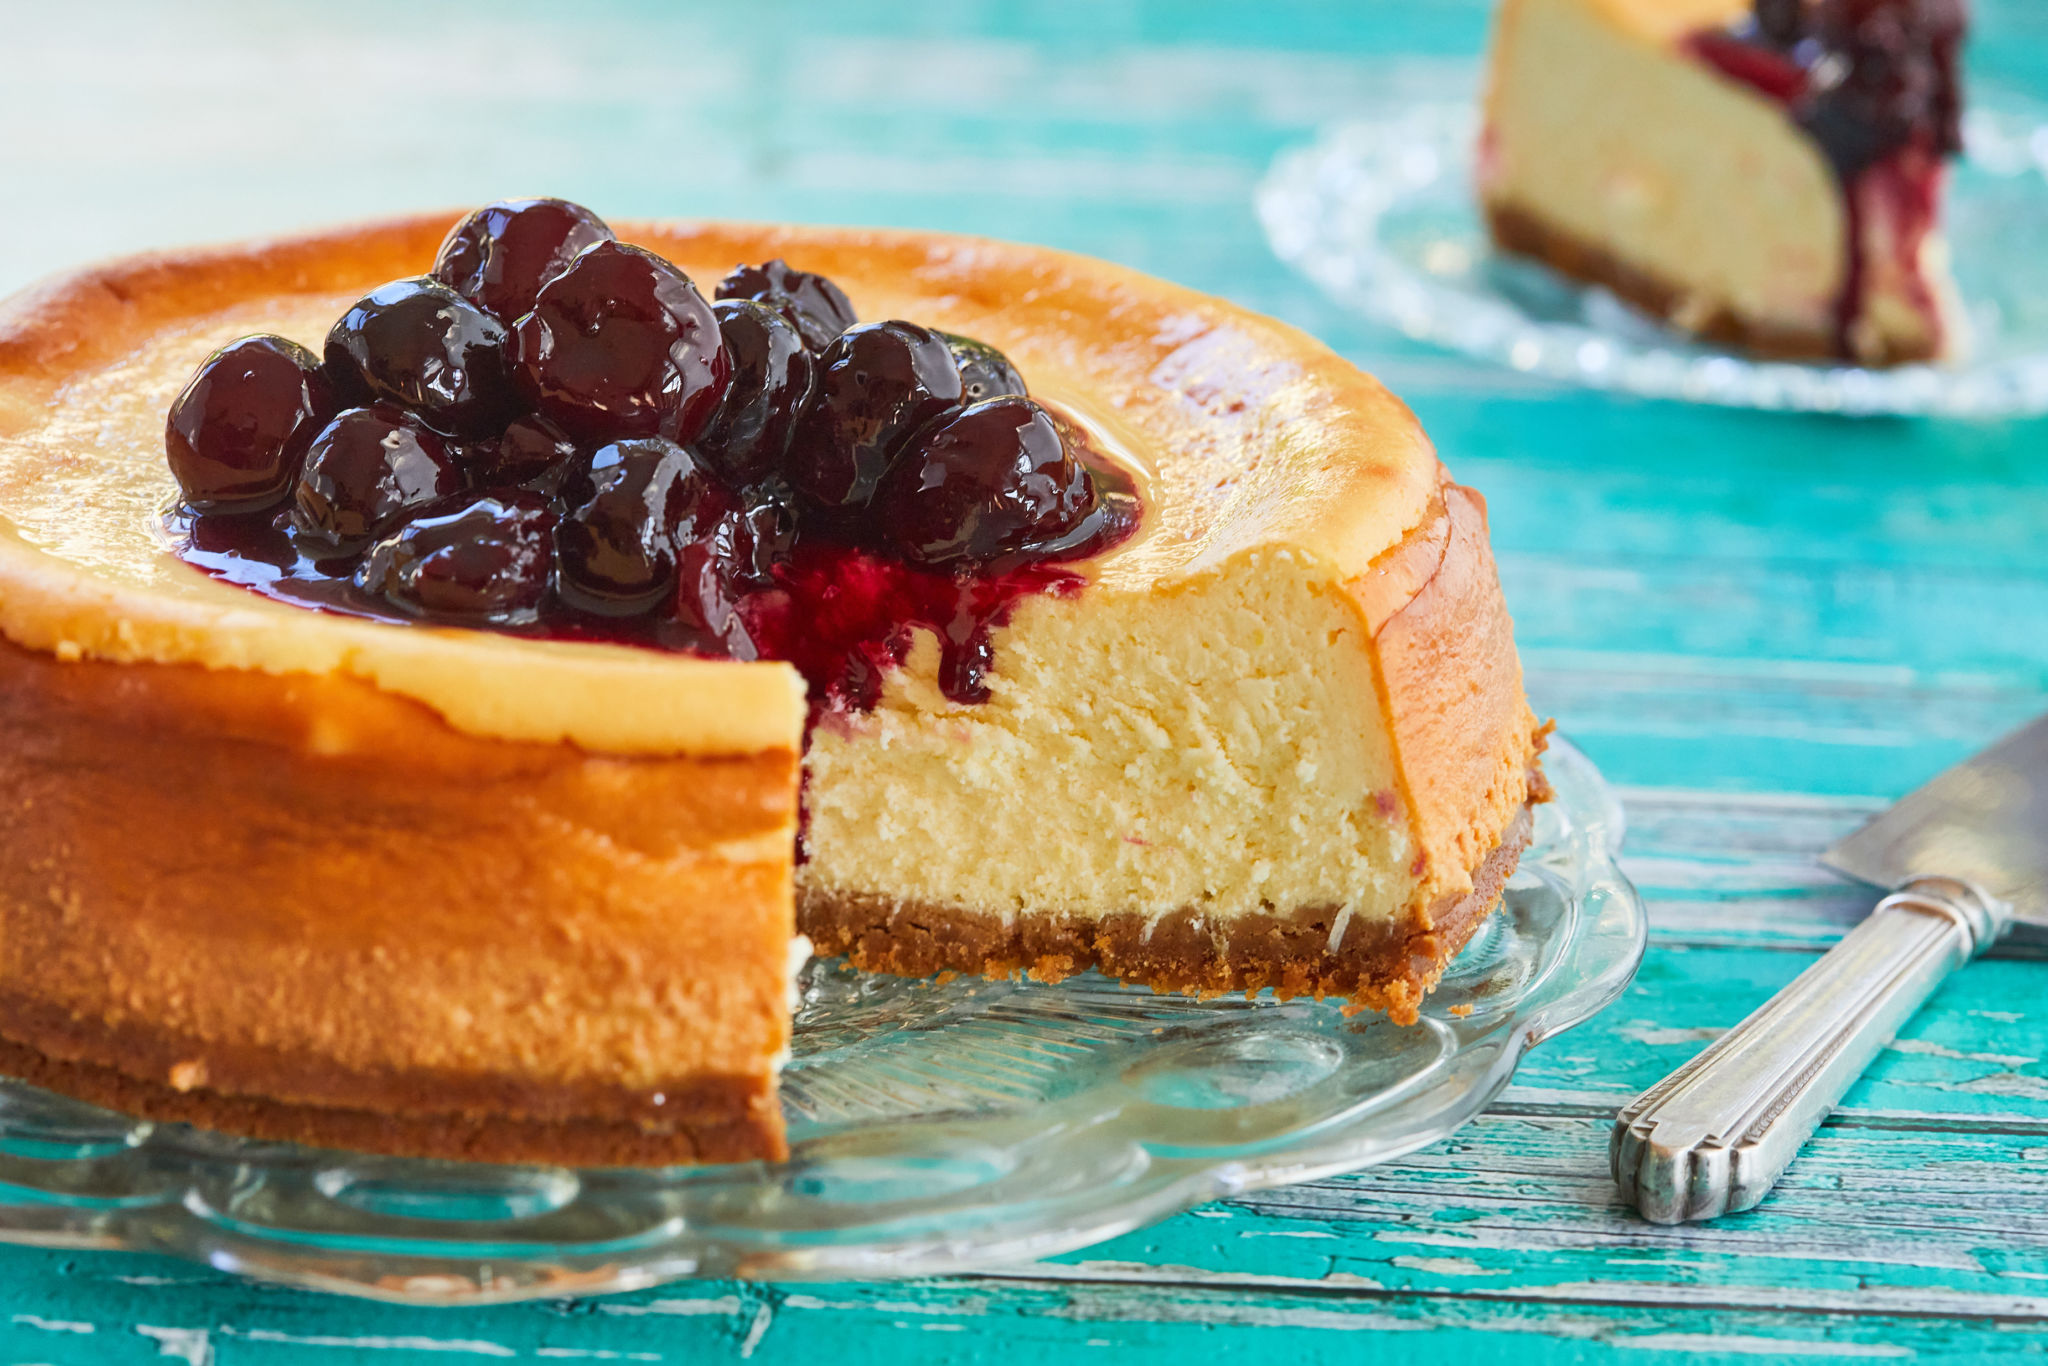 Why is cheesecake most popular?